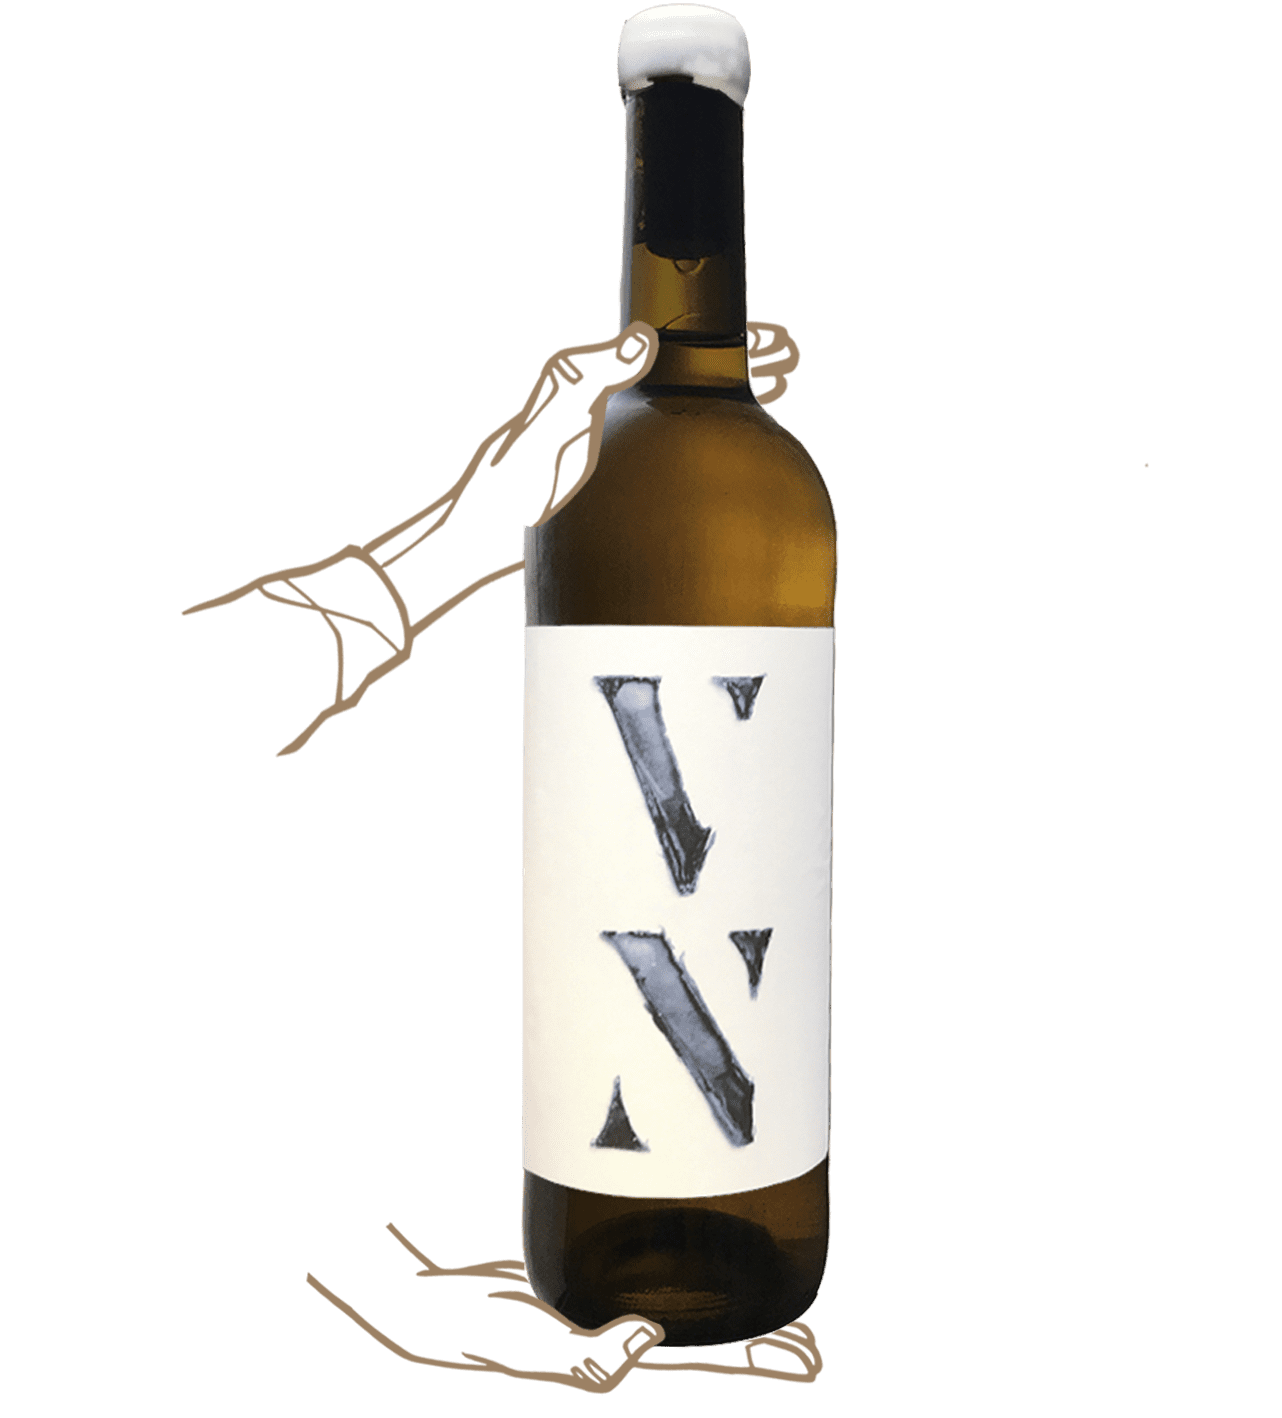 VN BLANC by PARTIDA CREUS is a Natural wine from Spain